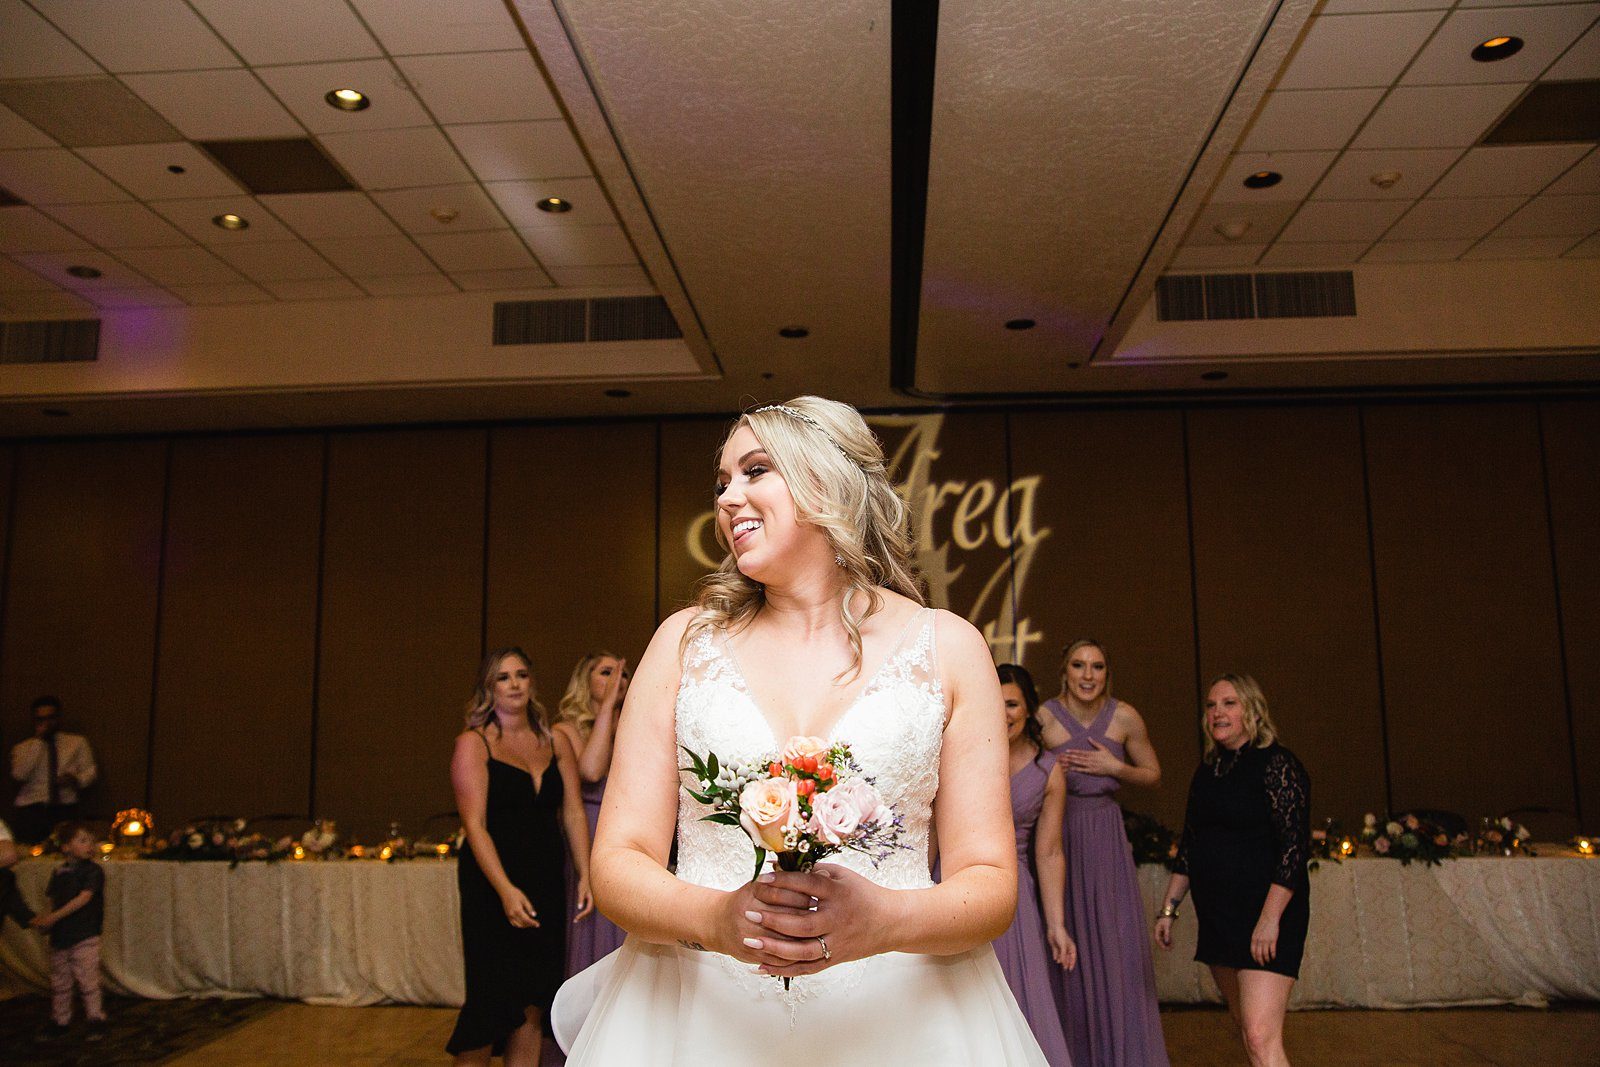 Bouquet toss at The Scottsdale Resort at McCormick Ranch wedding reception by Scottsdale wedding photographer PMA Photography.